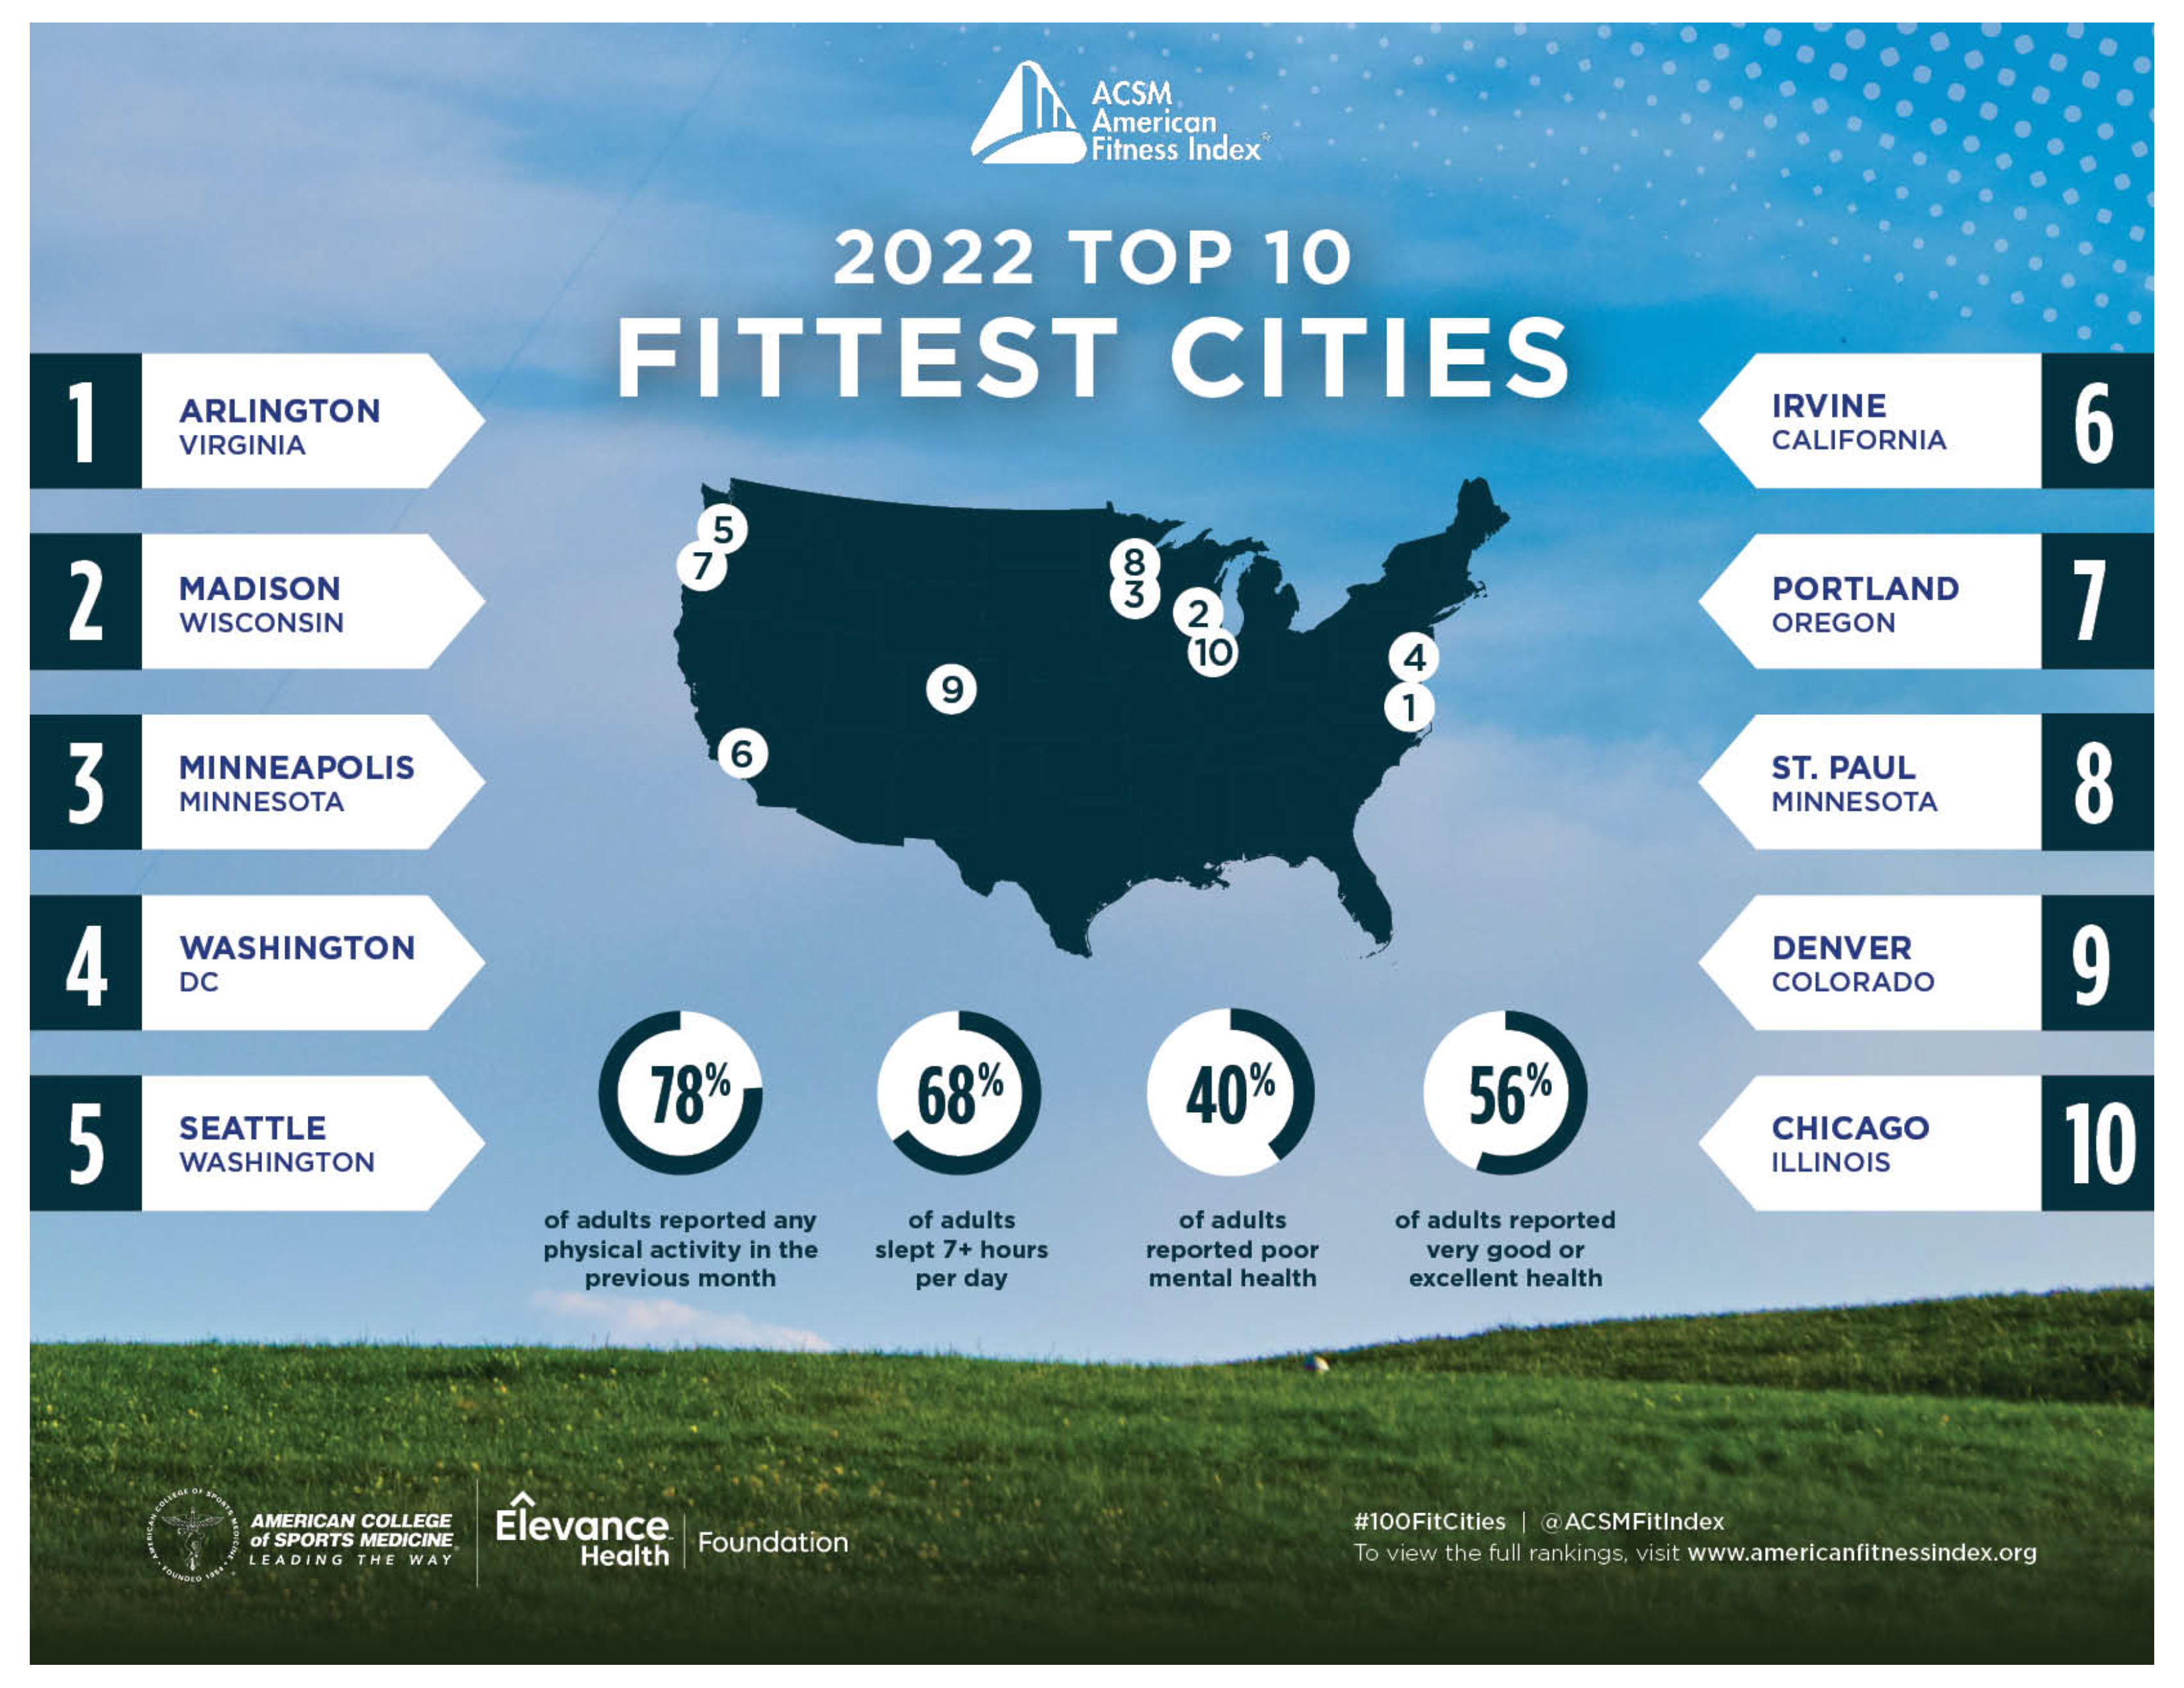 2022 American Fitness Index Top 10 Infographic